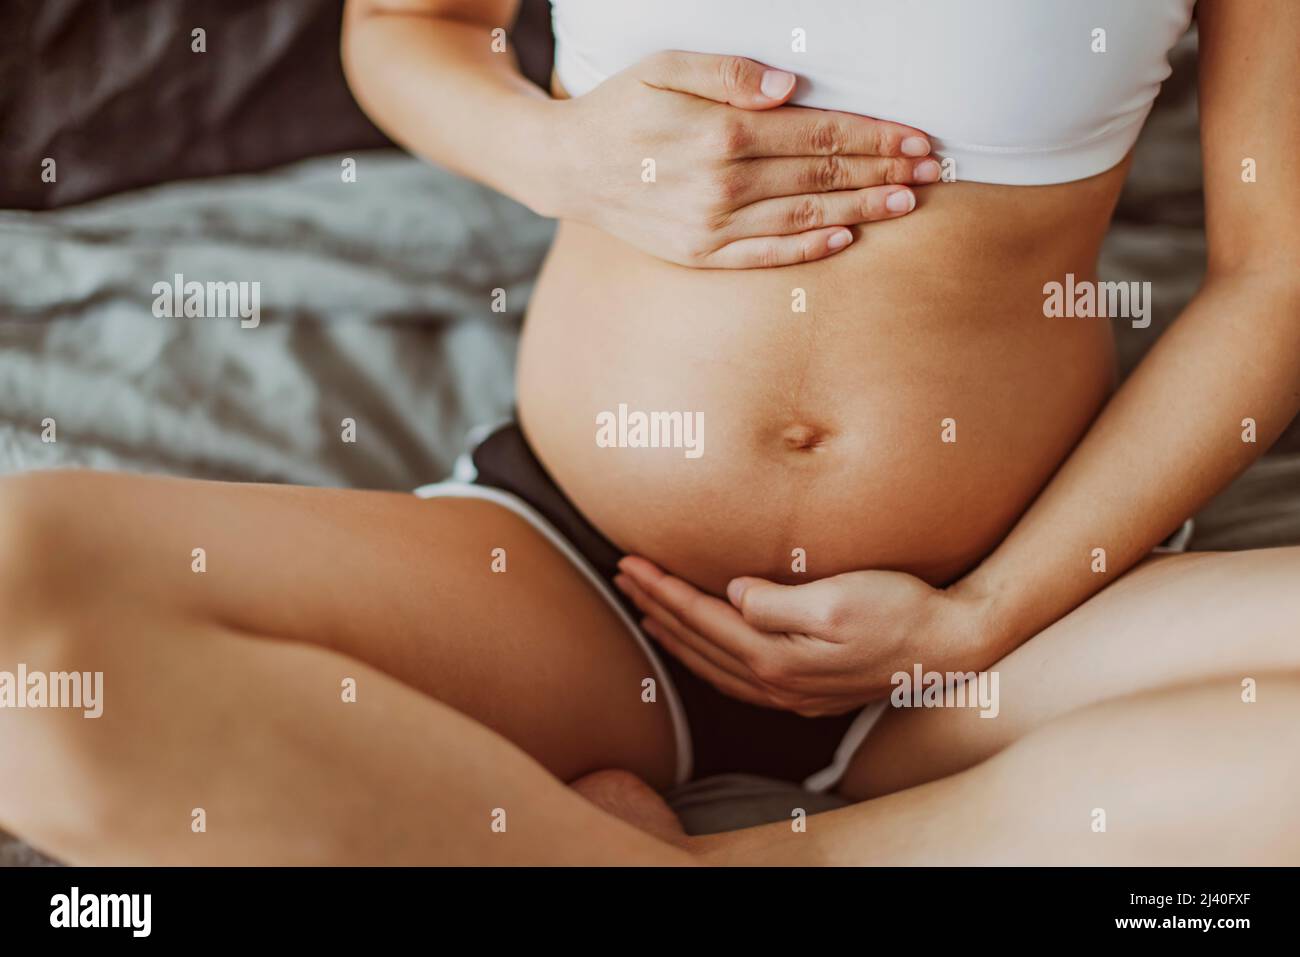 Pregnancy belly stretch marks and linea nigra. Pregnant woman caressing holding stomach during first trimester. Skincare body care health concept Stock Photo